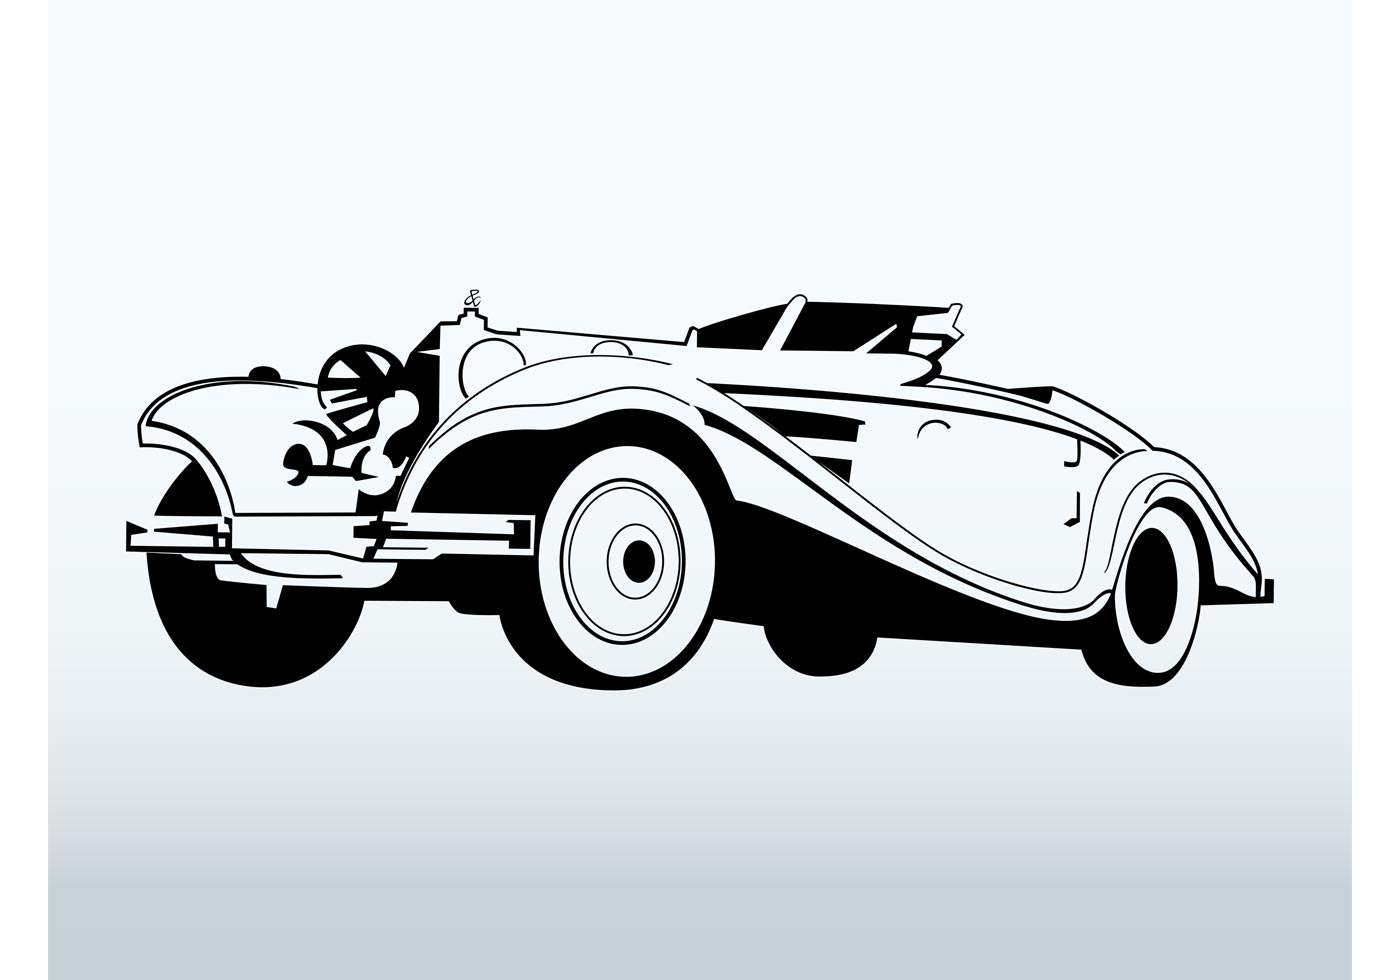 Classic Car Silhouette - Download Free Vector Art, Stock Graphics ...